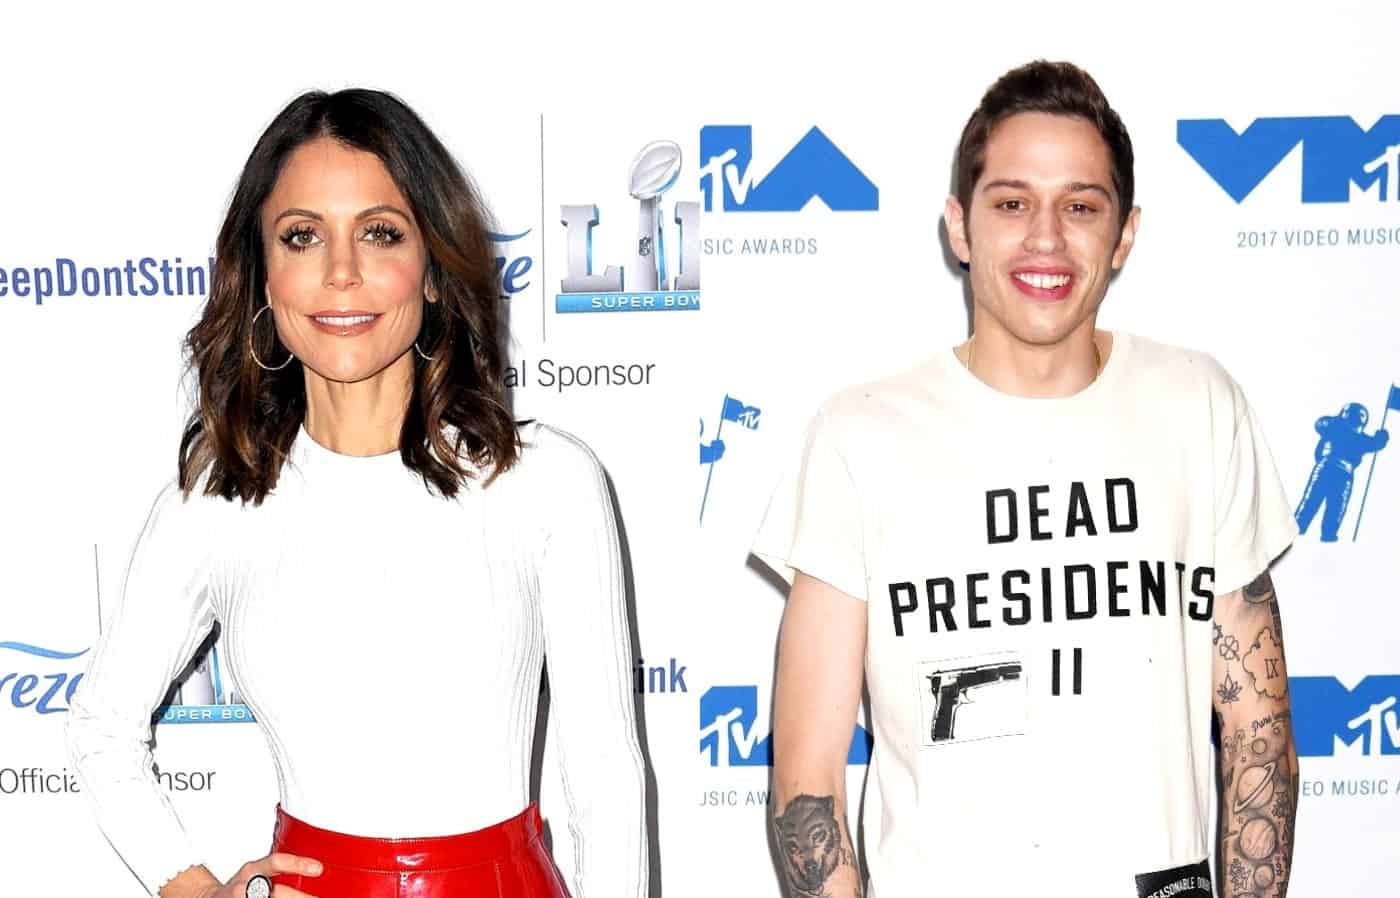 RHONY's Bethenny Frankel Shares X-Rated Tweet About Pete Davidson